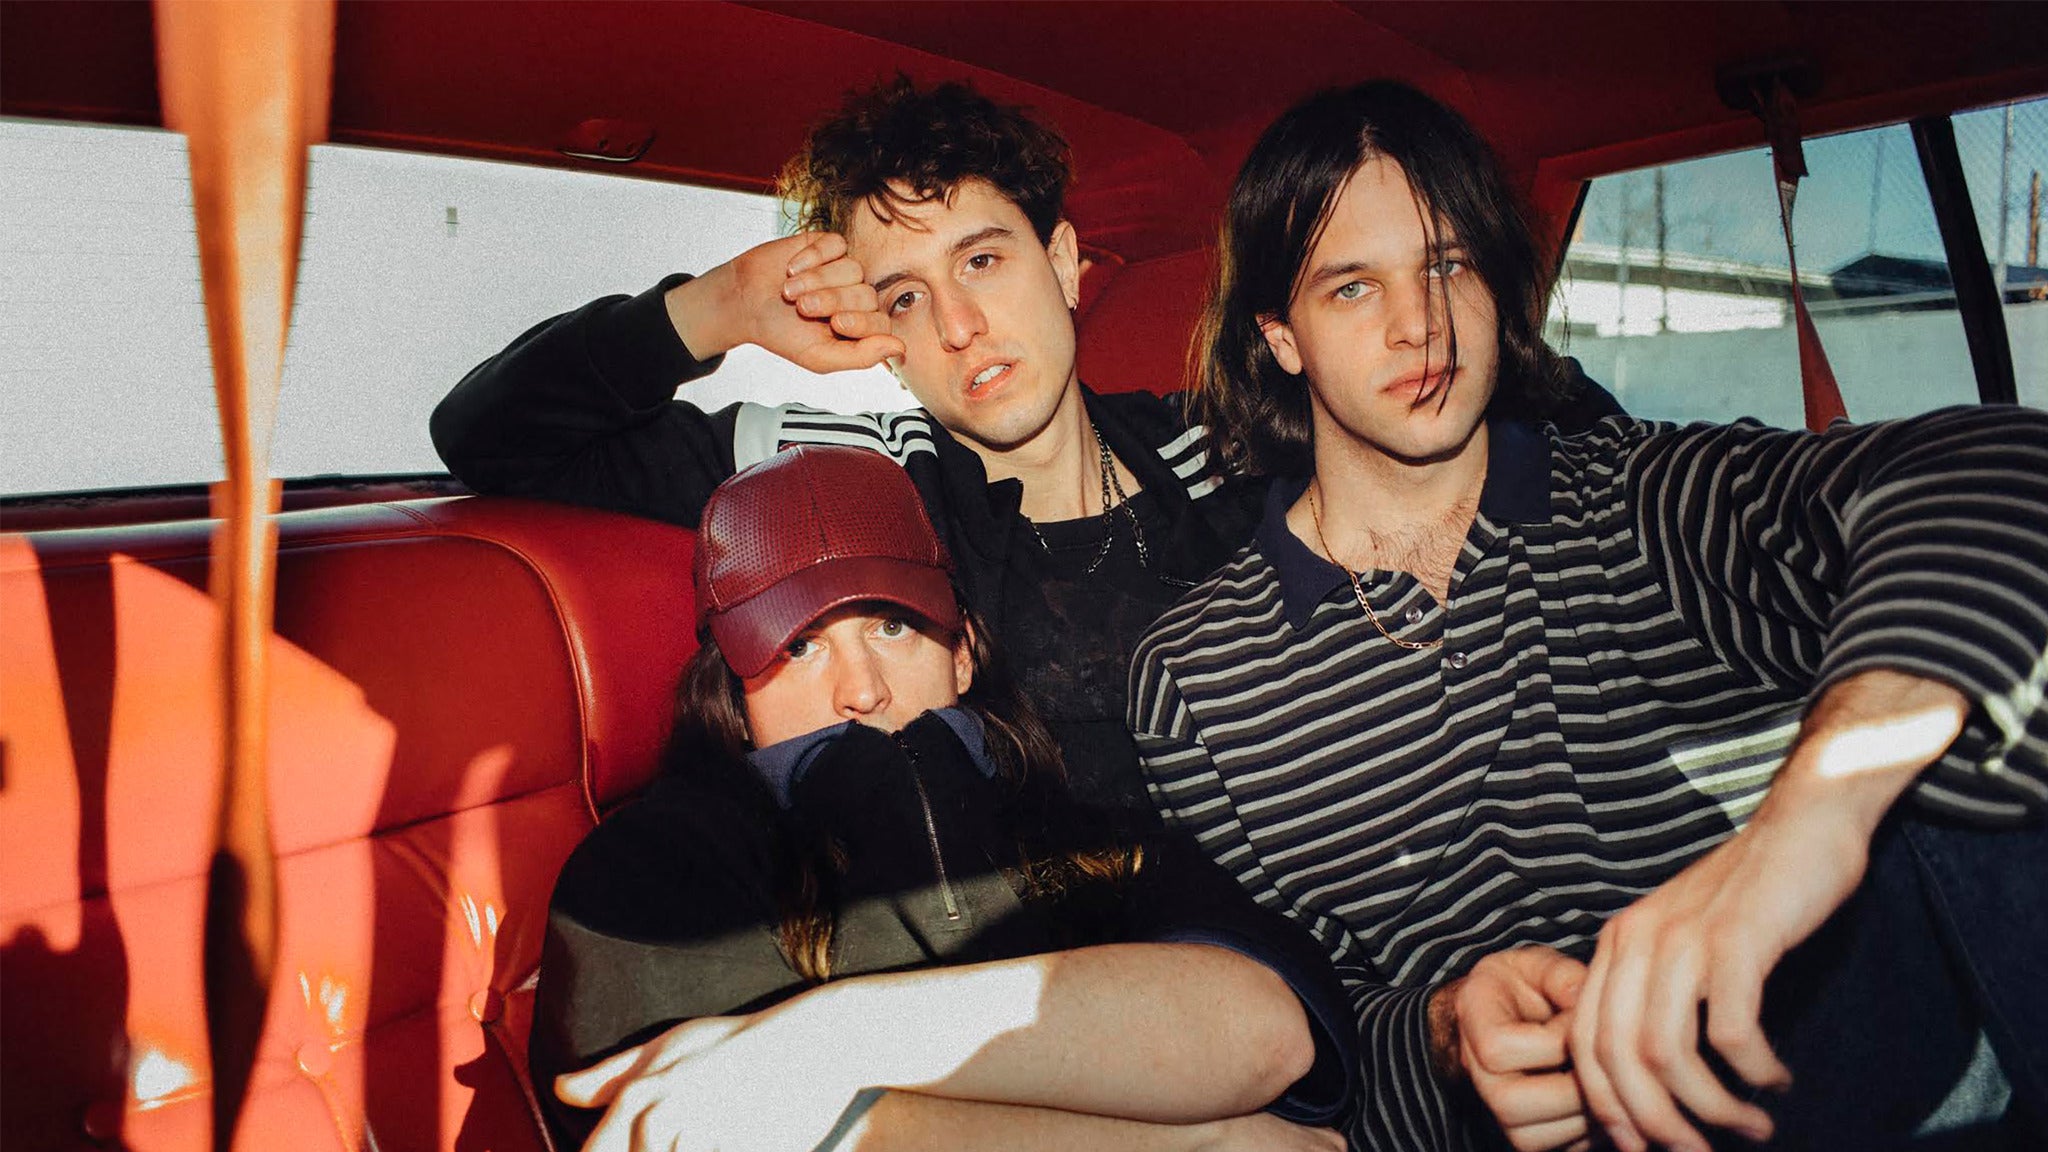 Beach Fossils in Los Angeles promo photo for Artist presale offer code